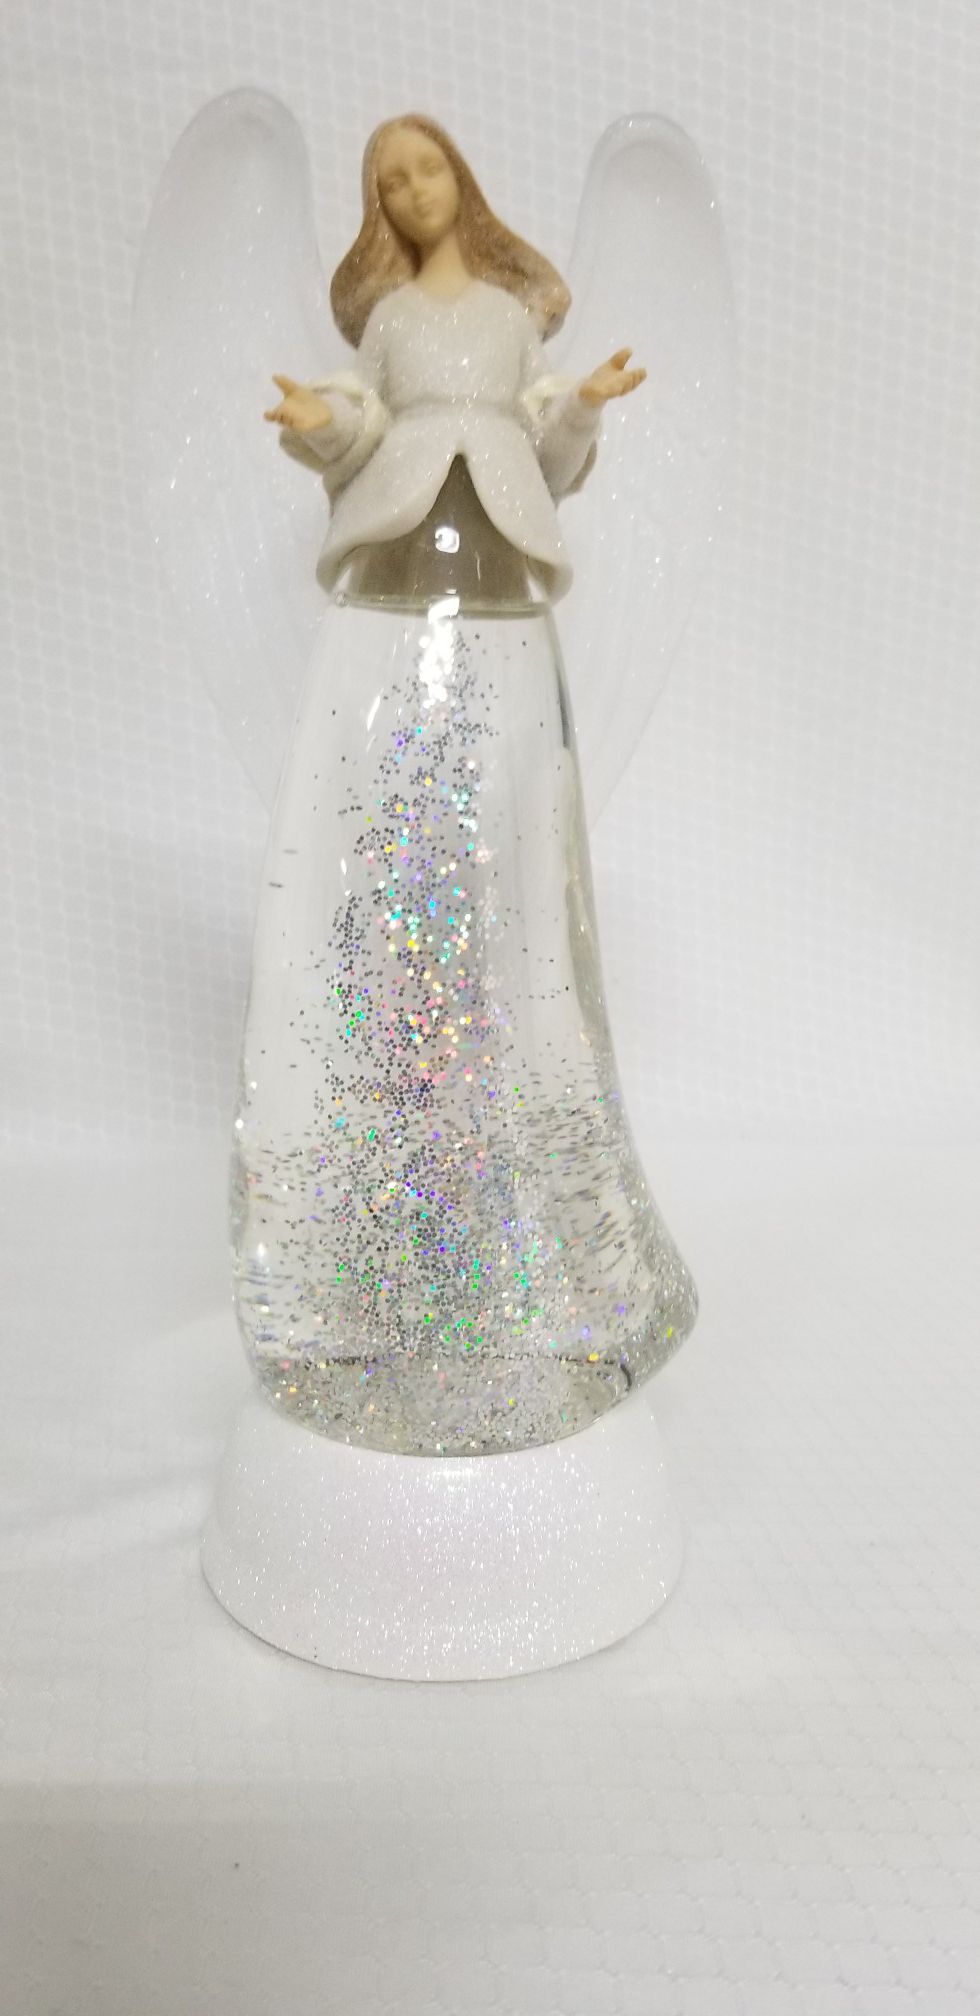 NEW - OPEN ARM ANGEL LIGHT UP SNOWGLOBE BY VALERIE PARR HILL